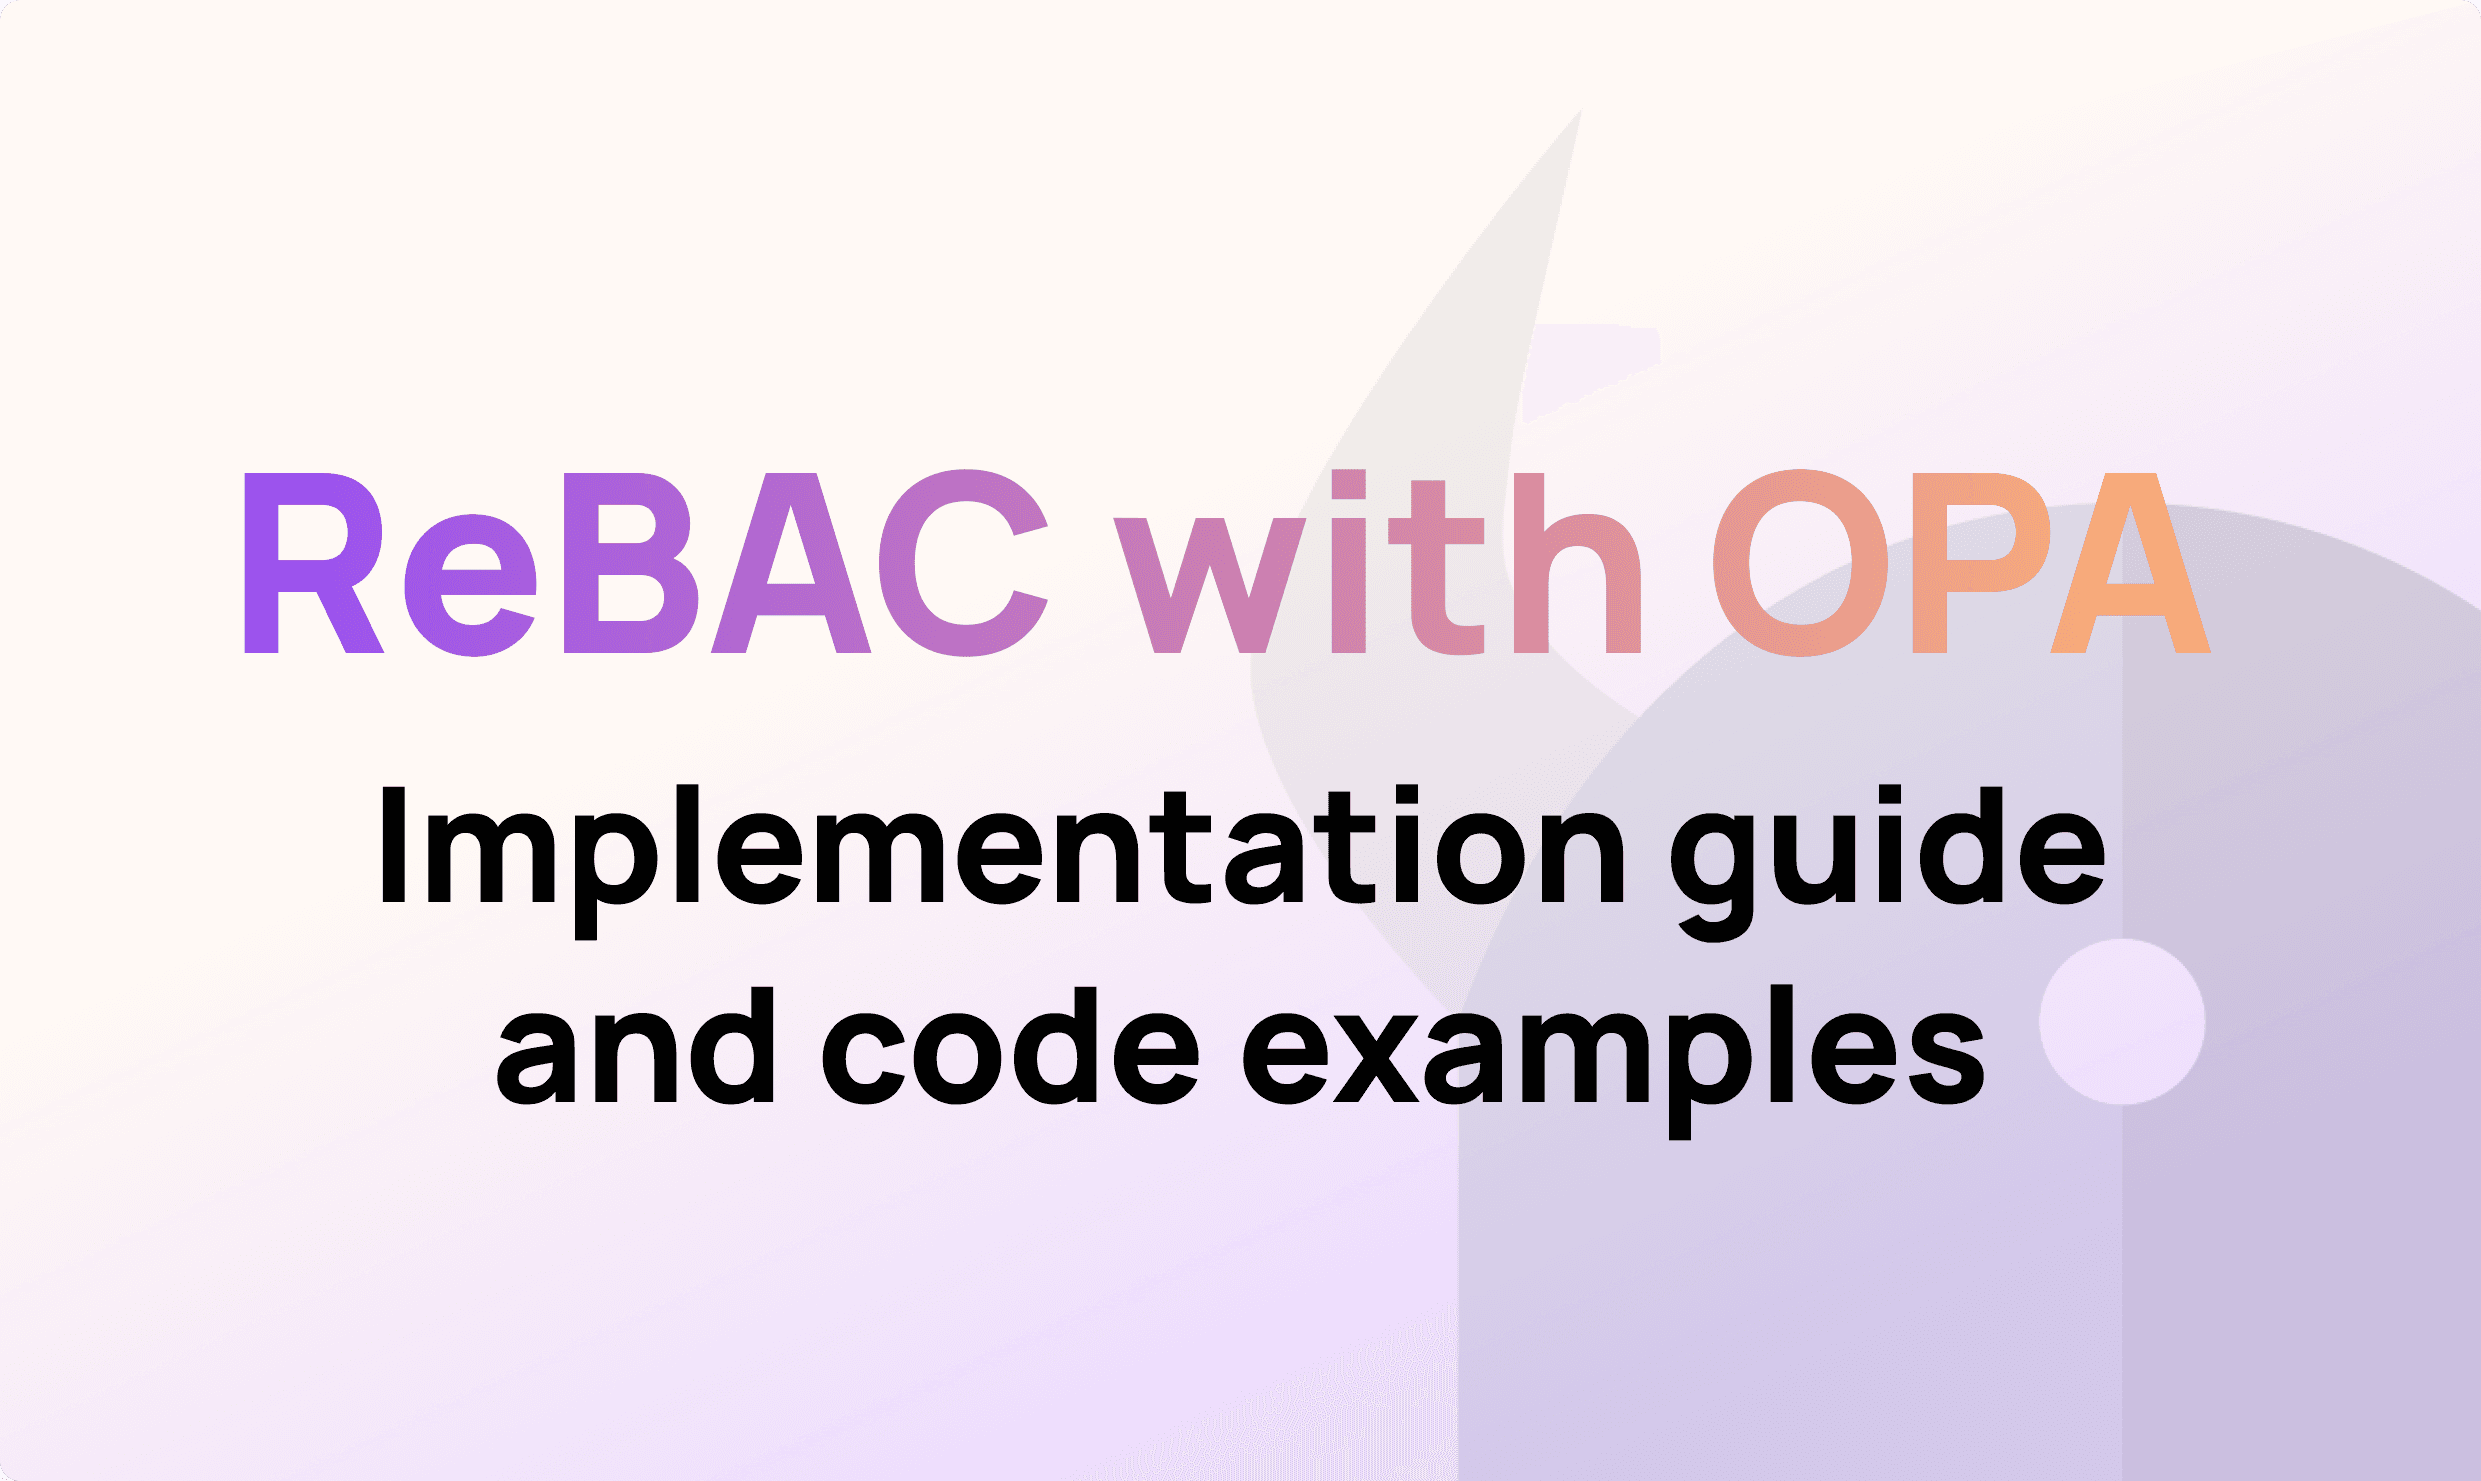 How to Implement Relationship-Based Access Control (ReBAC) Using Open Policy Agent (OPA)